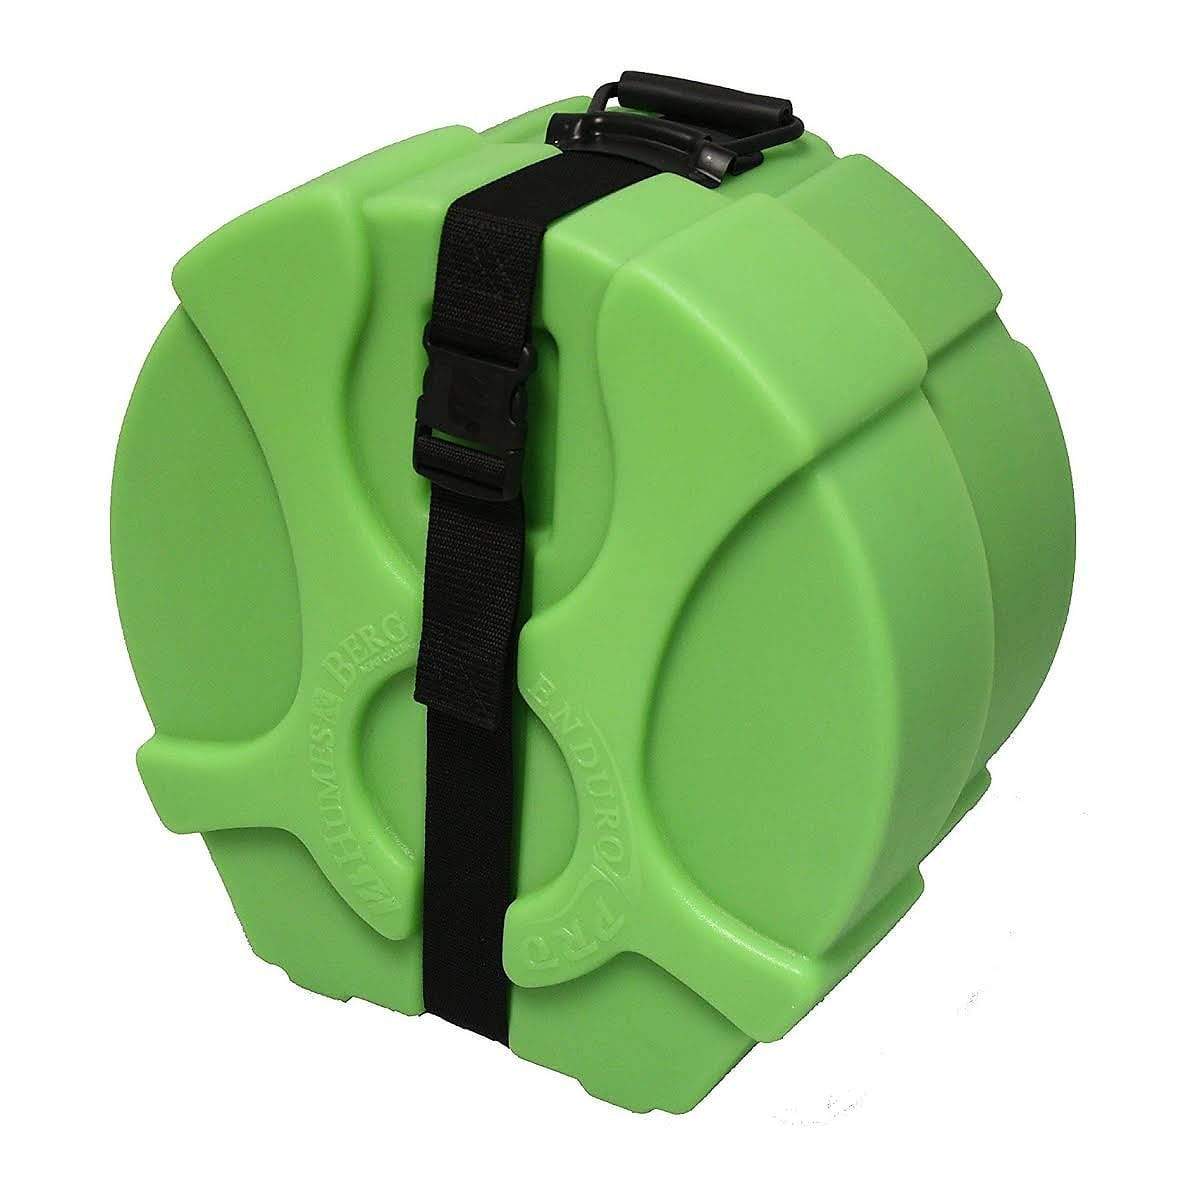 Humes & Berg 6.5x14 Enduro Pro Snare Drum Case Lime Green w/Foam Drums and Percussion / Parts and Accessories / Cases and Bags